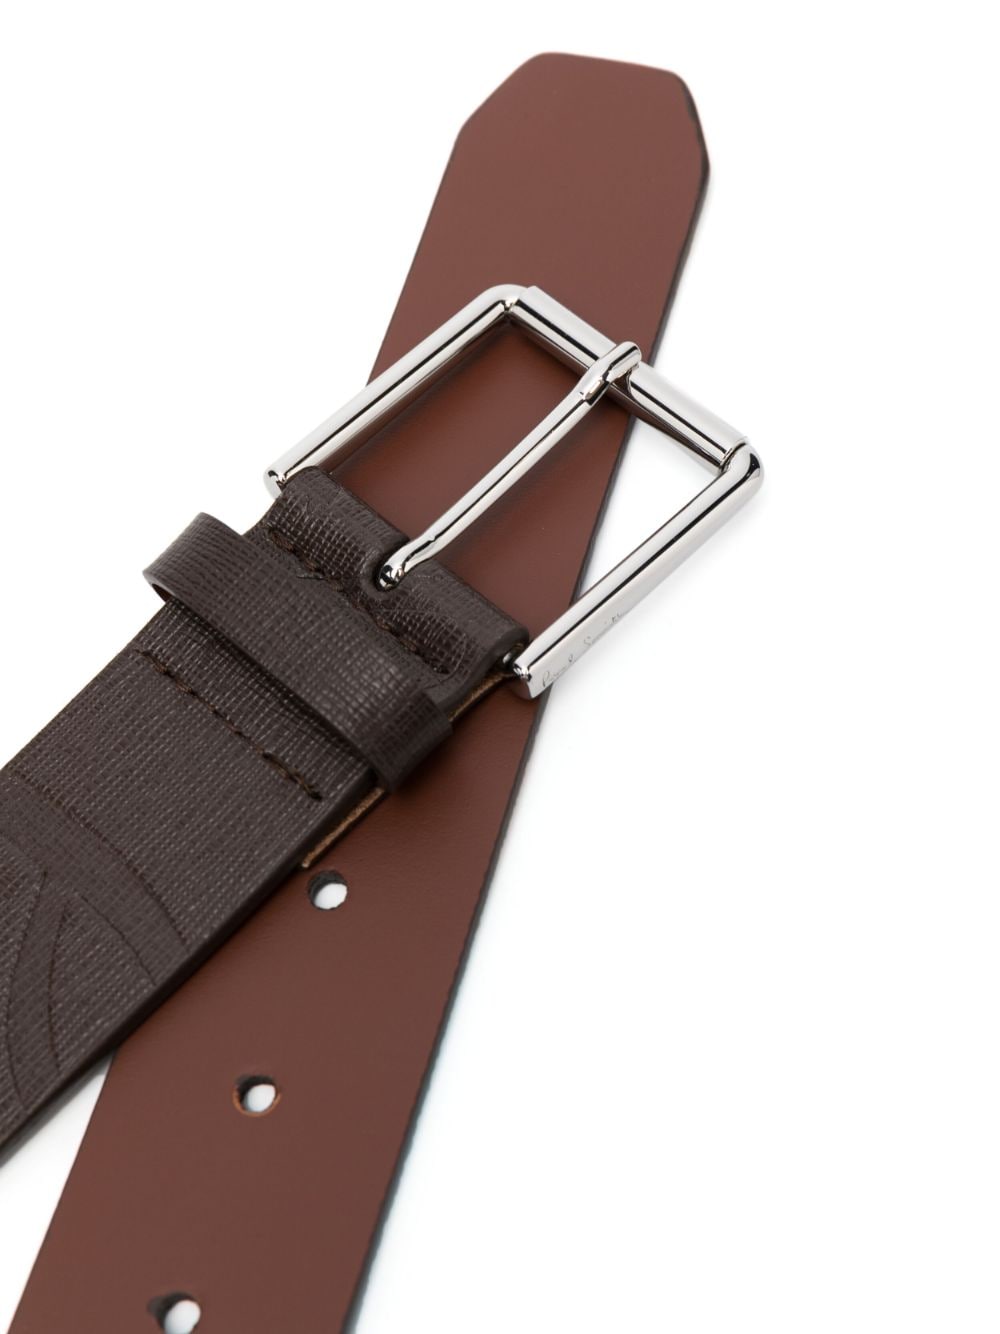 Paul Smith Belts Leather Brown